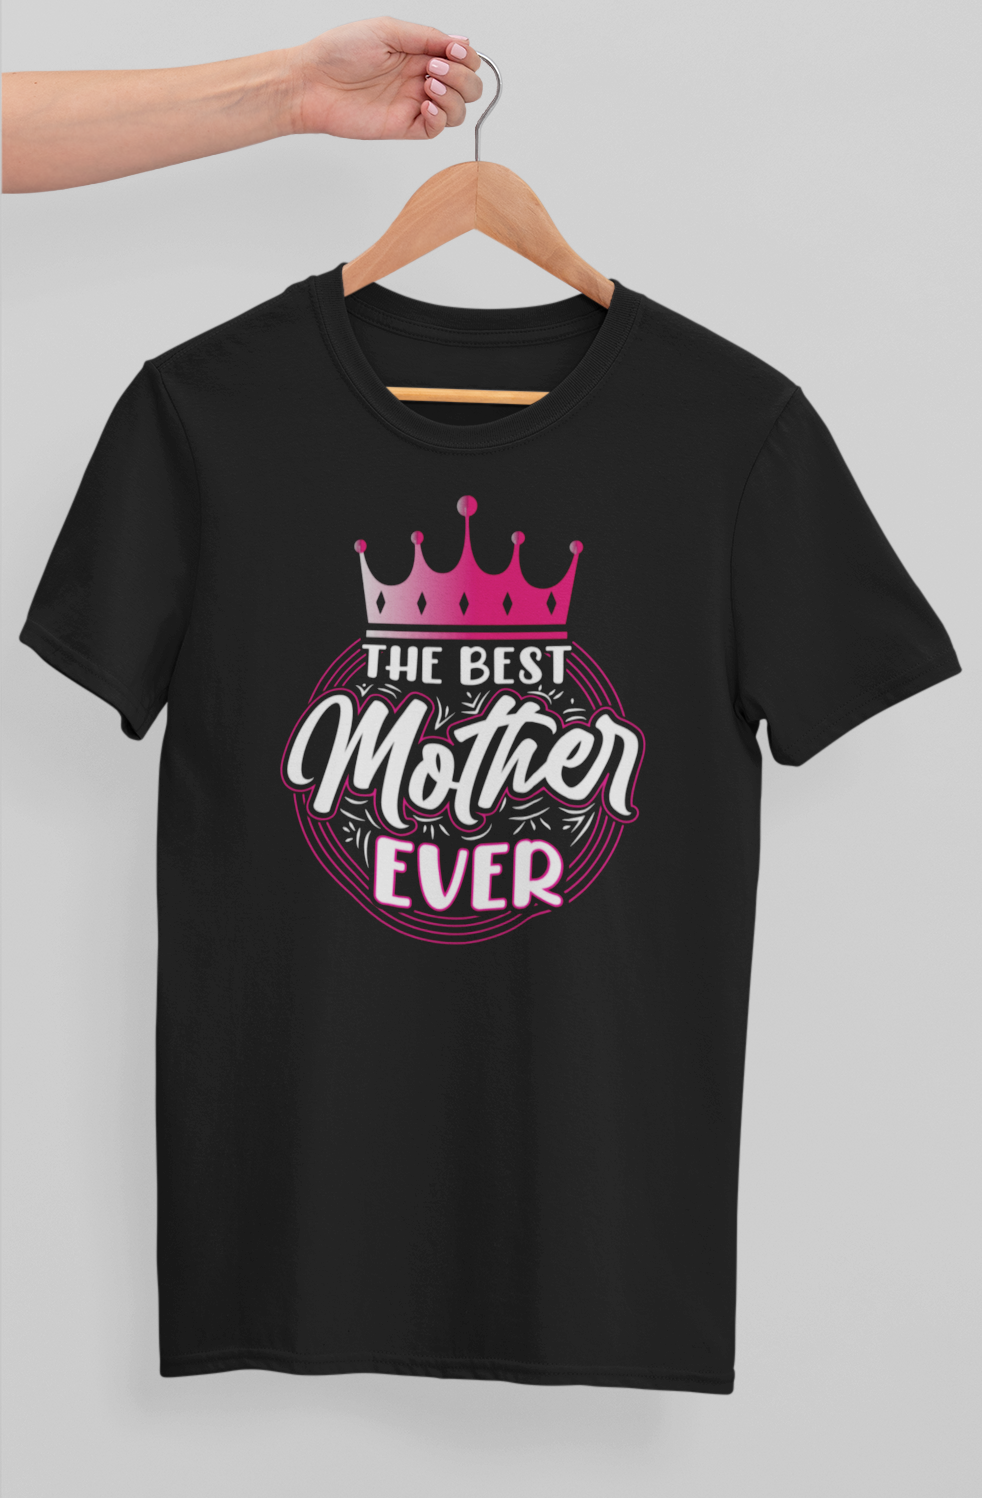 The Best Mom Ever T-shirt